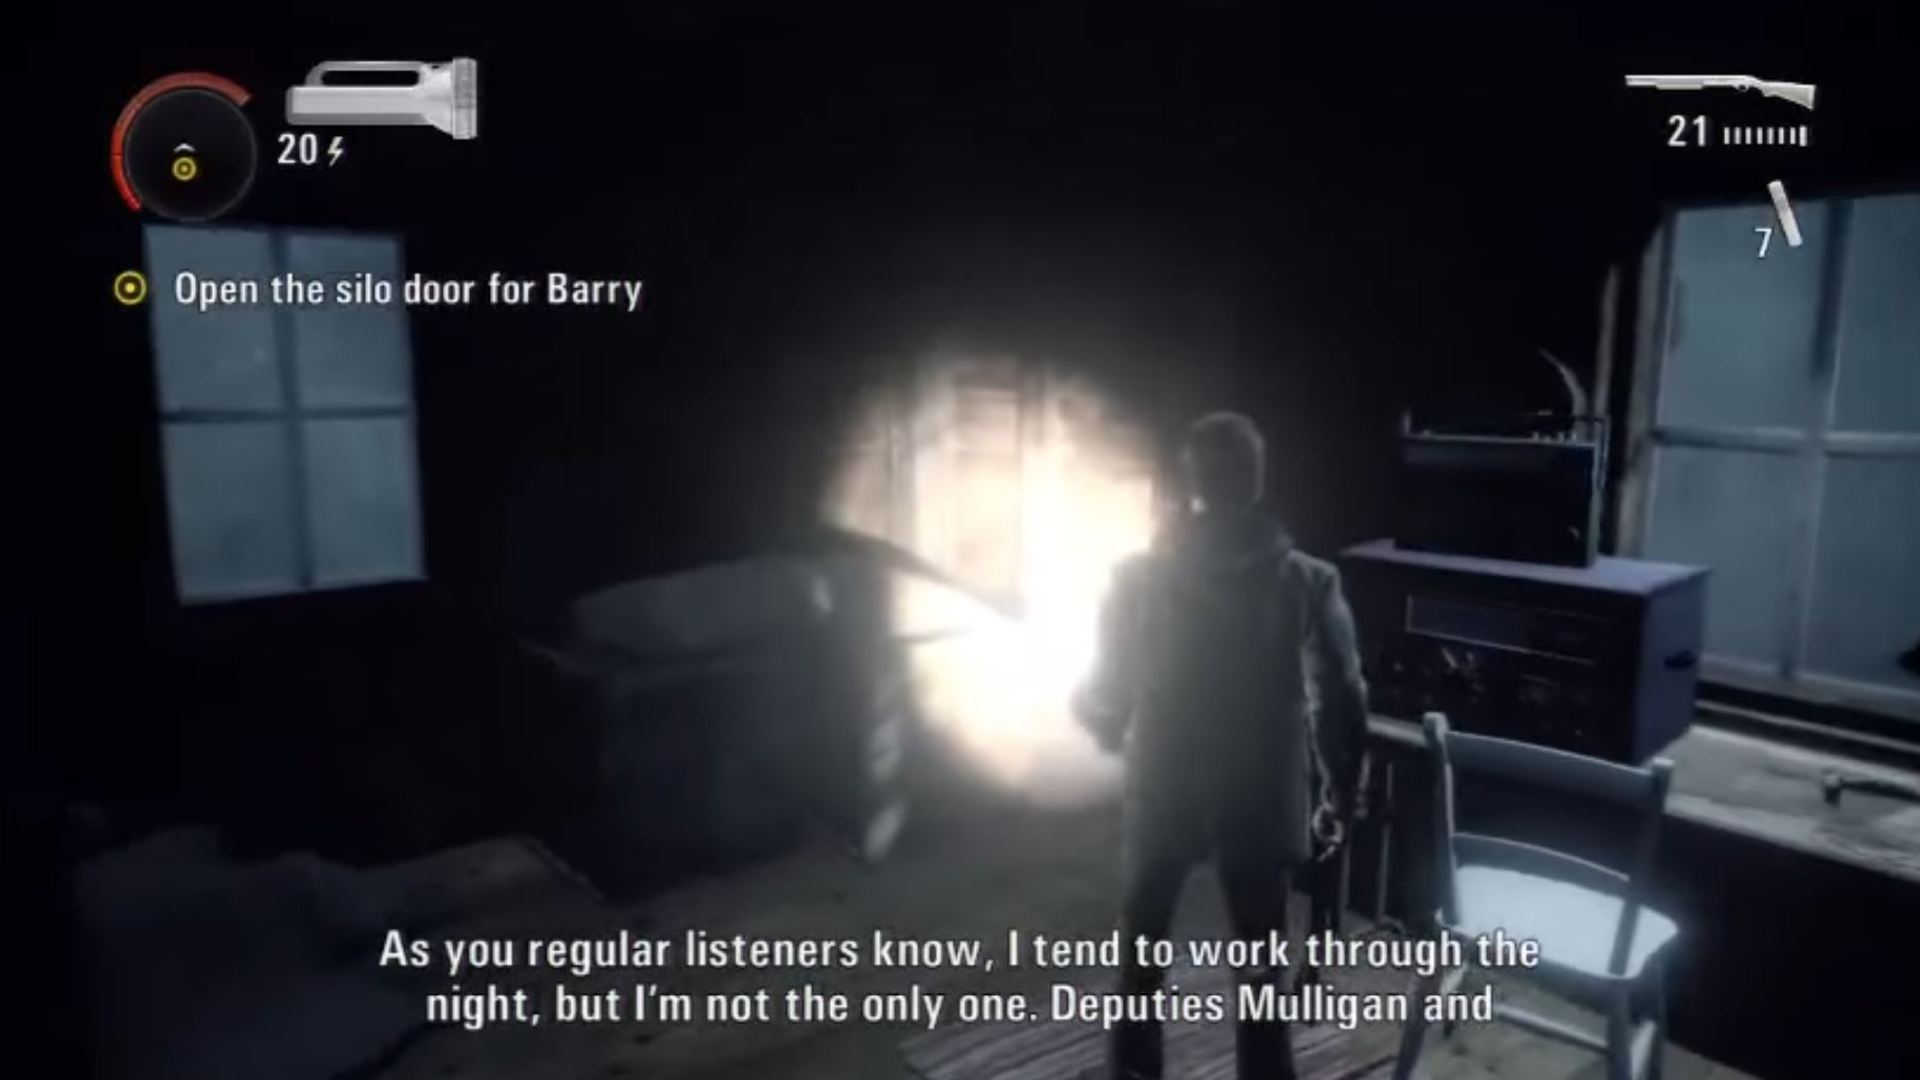 Alan Wake Remastered radios: Alan can be seen looking at the radio on the shelf.